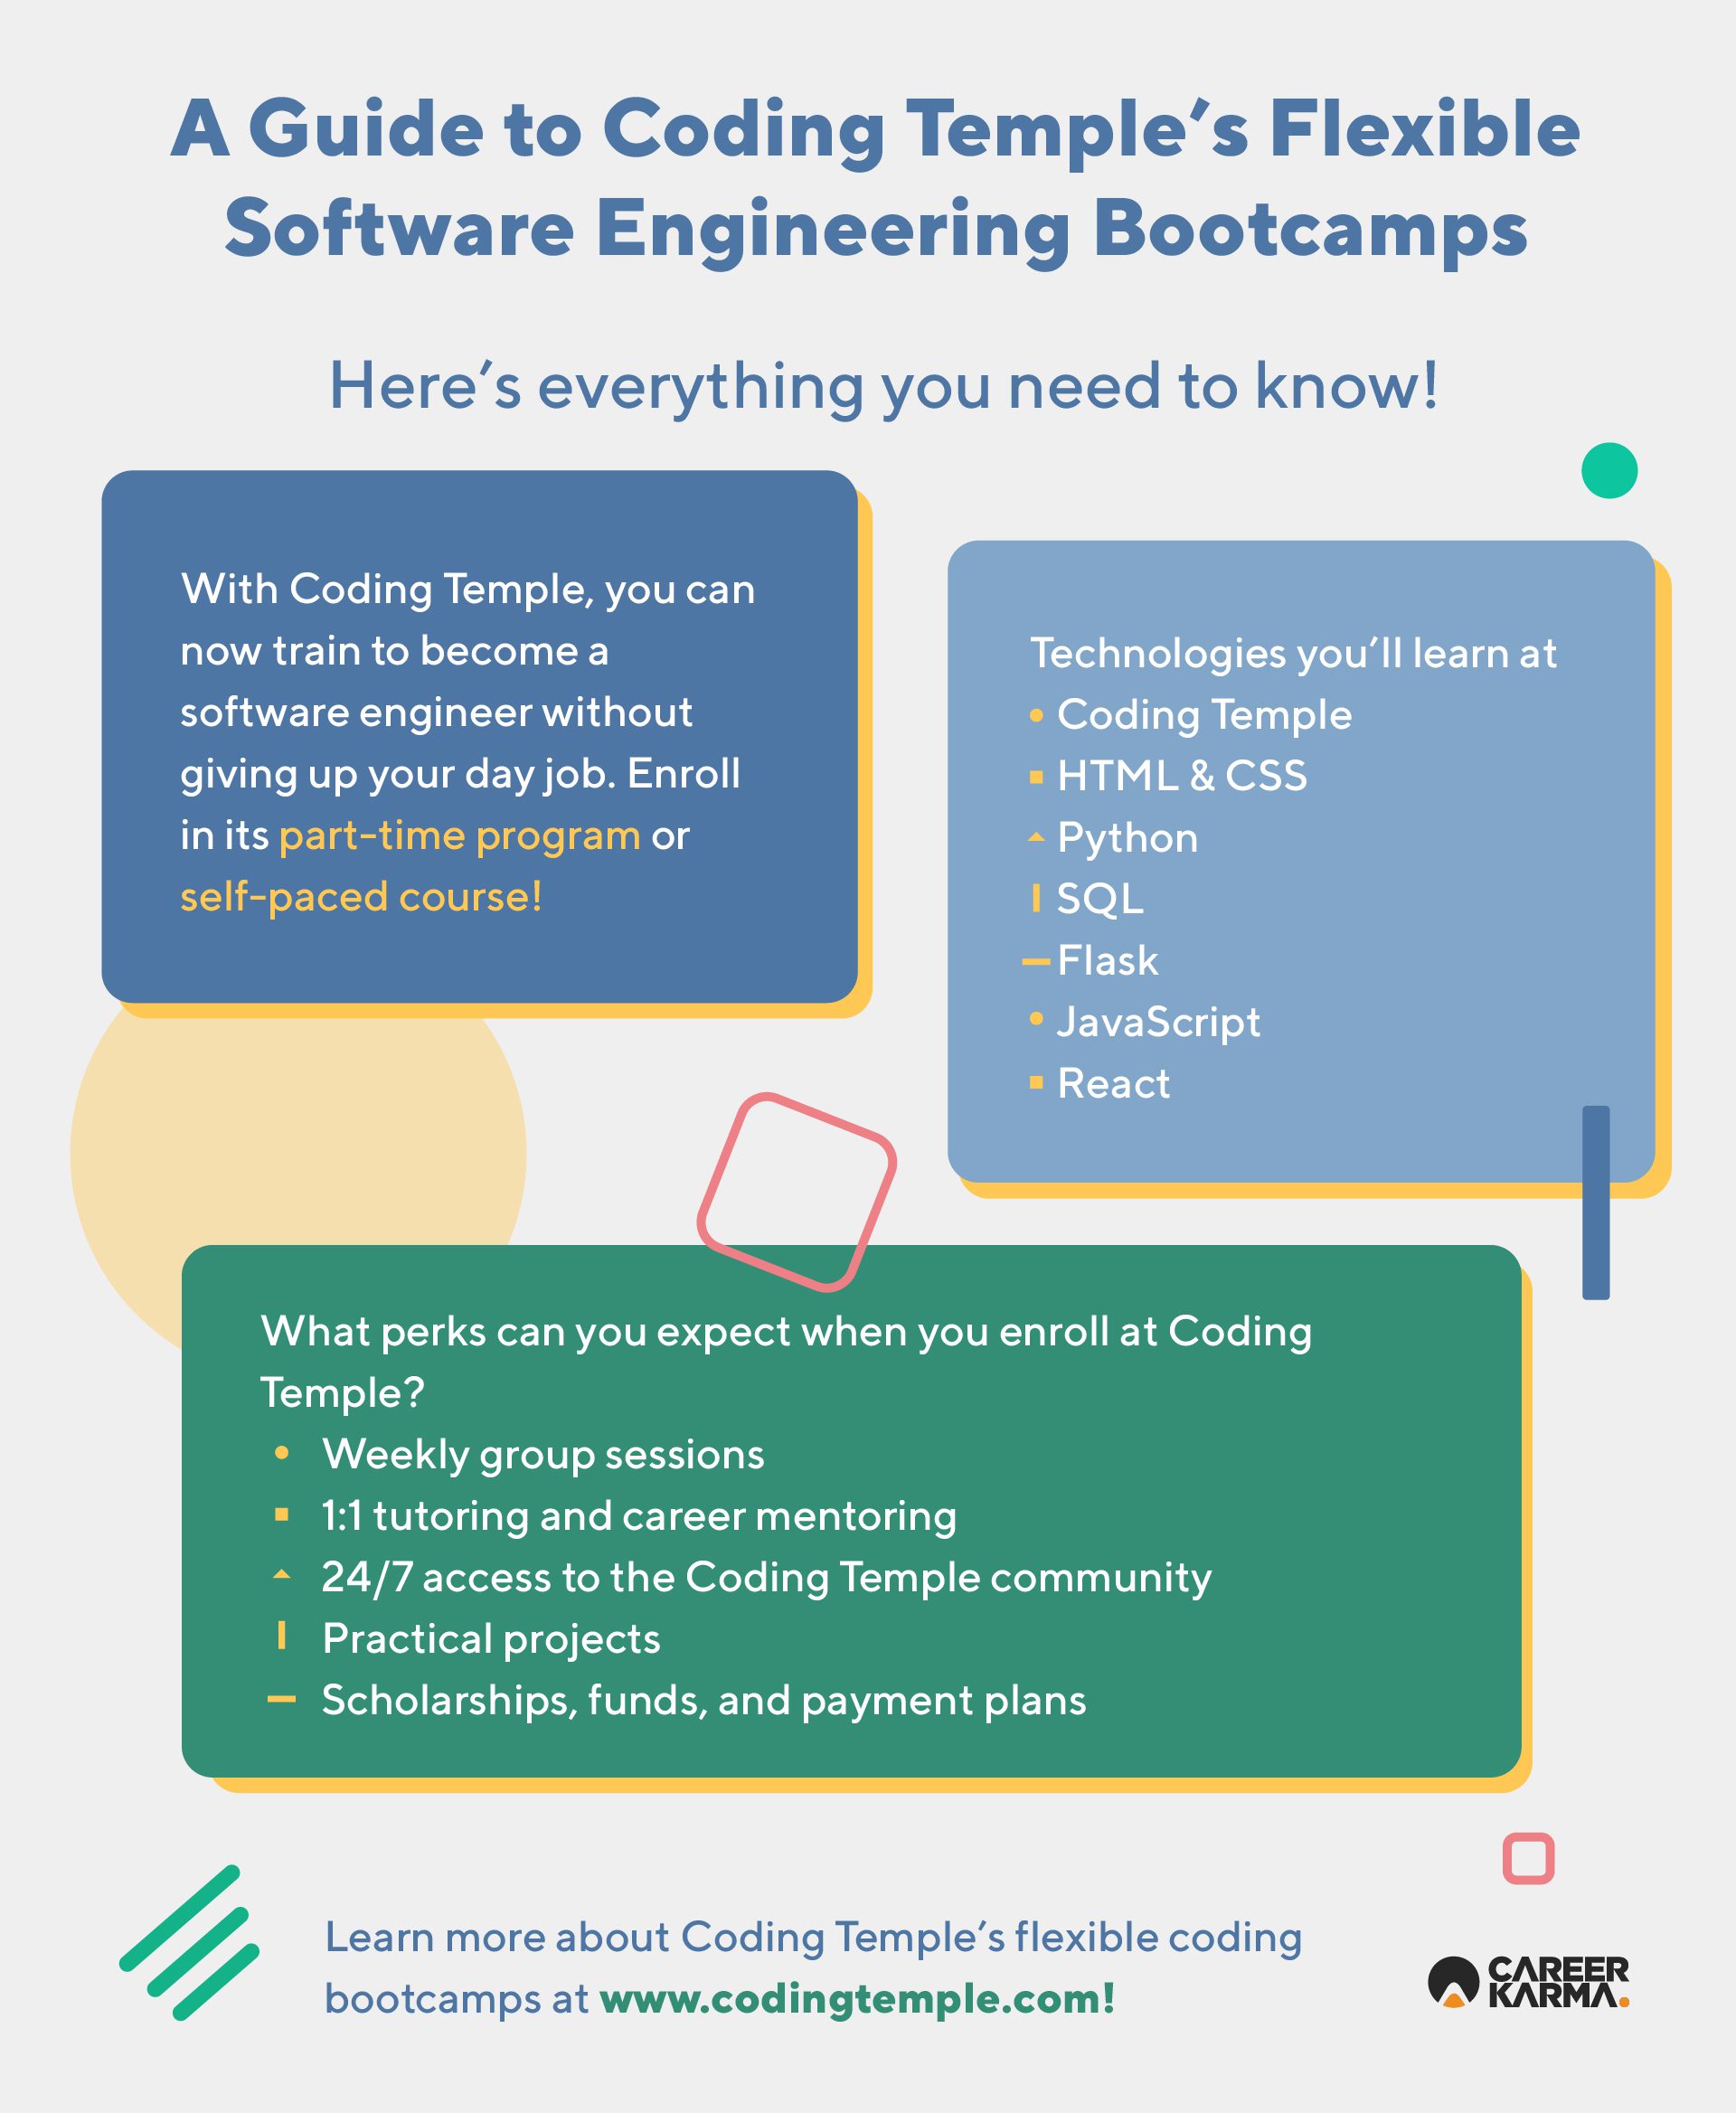 An infographic showing an overview of Coding Temple’s Flexible Software Engineering Bootcamps